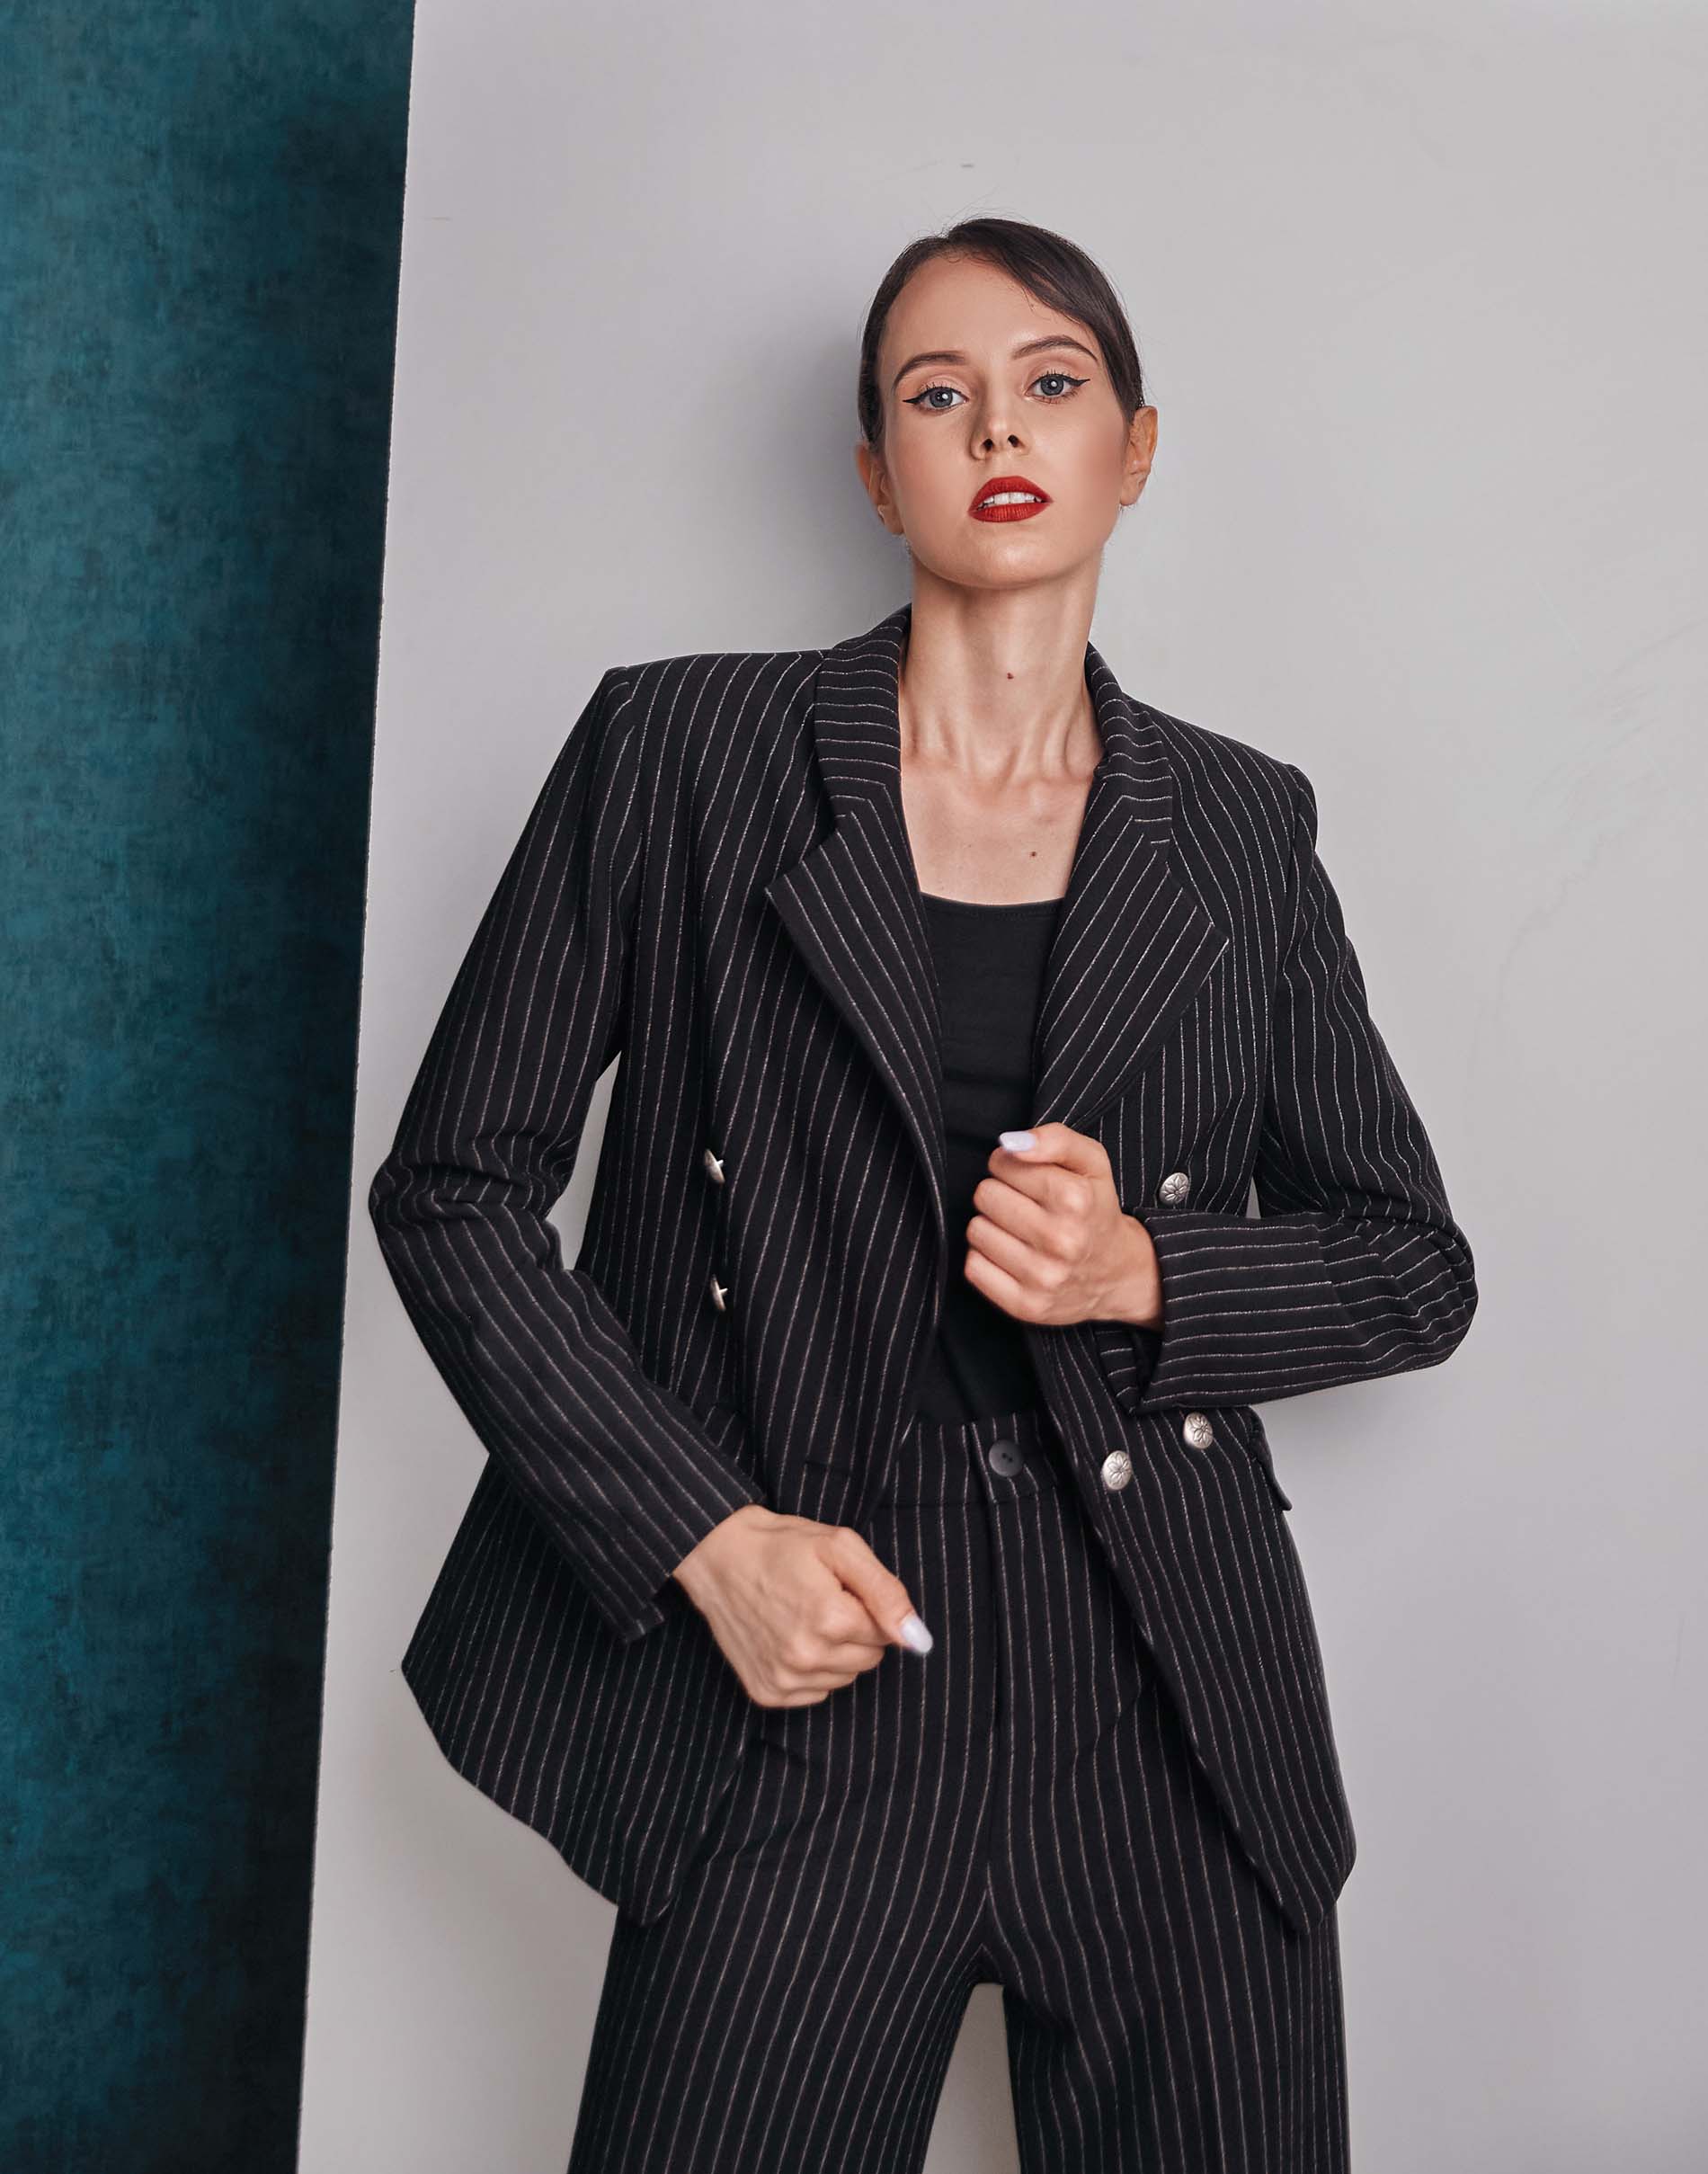 Pinstriped double breasted black blazer and black pant look